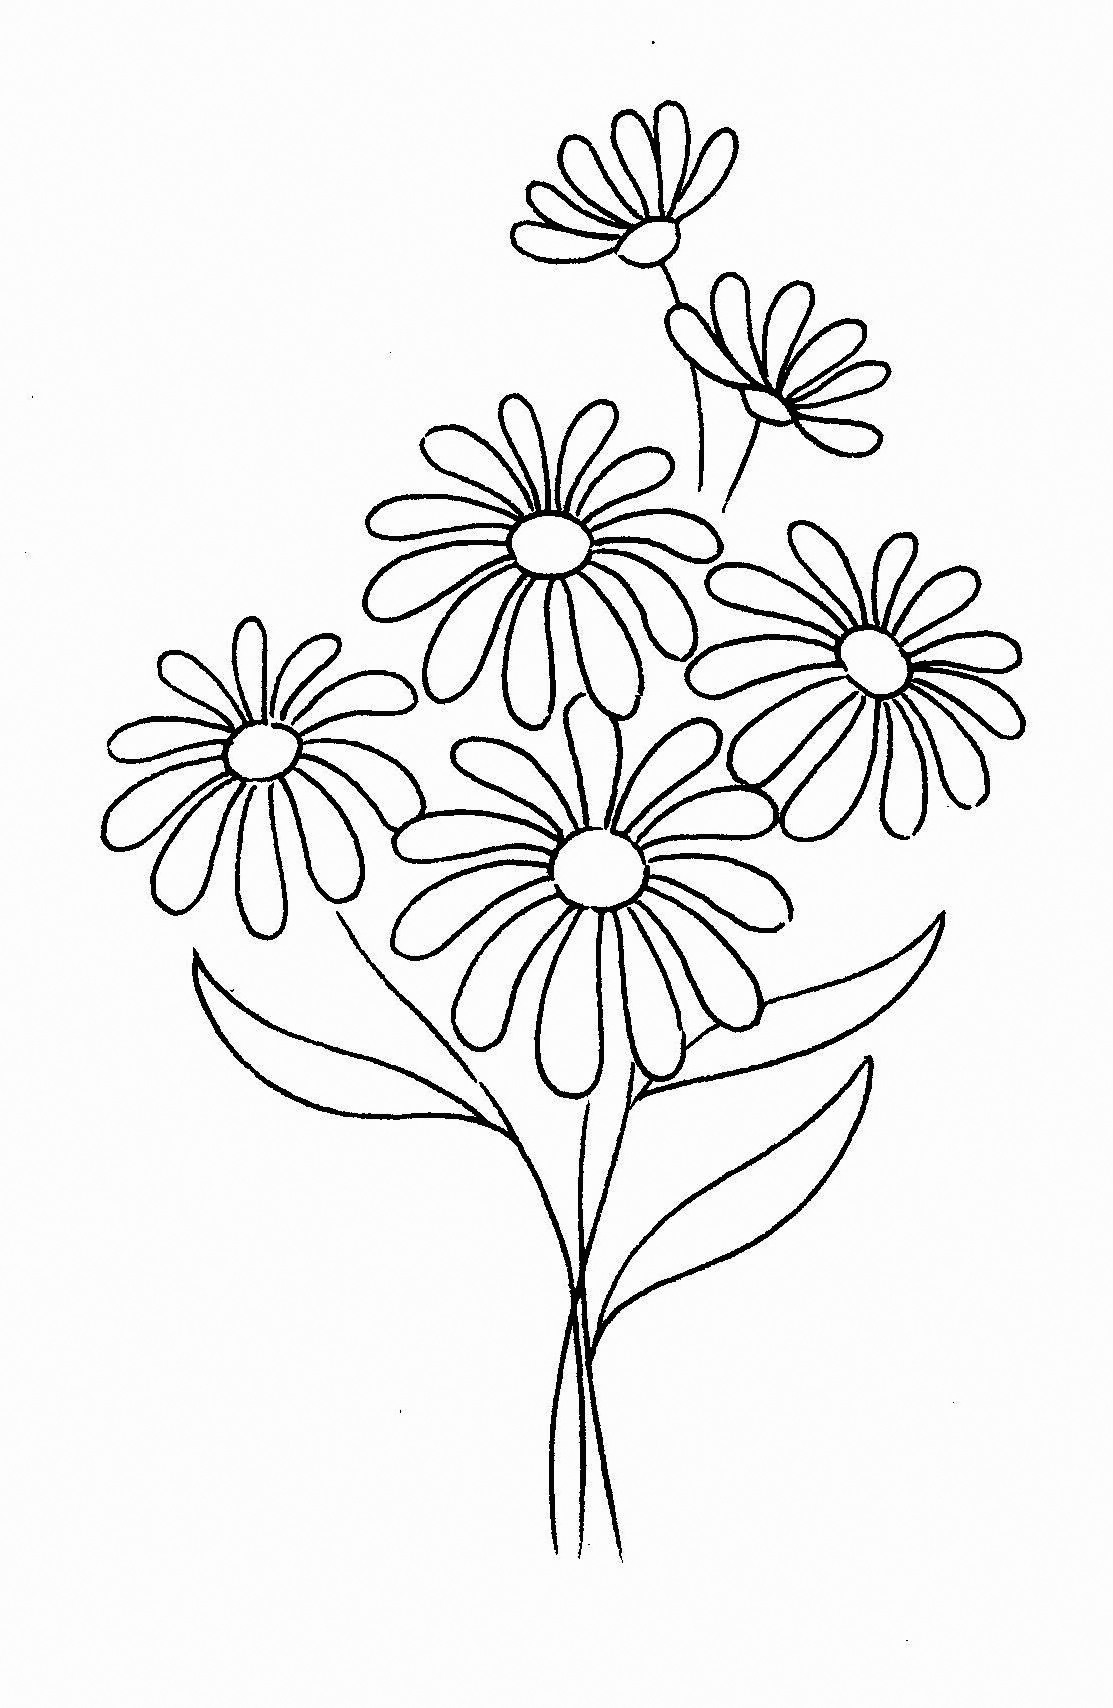 Download Daisy Coloring Pages - Best Coloring Pages For Kids